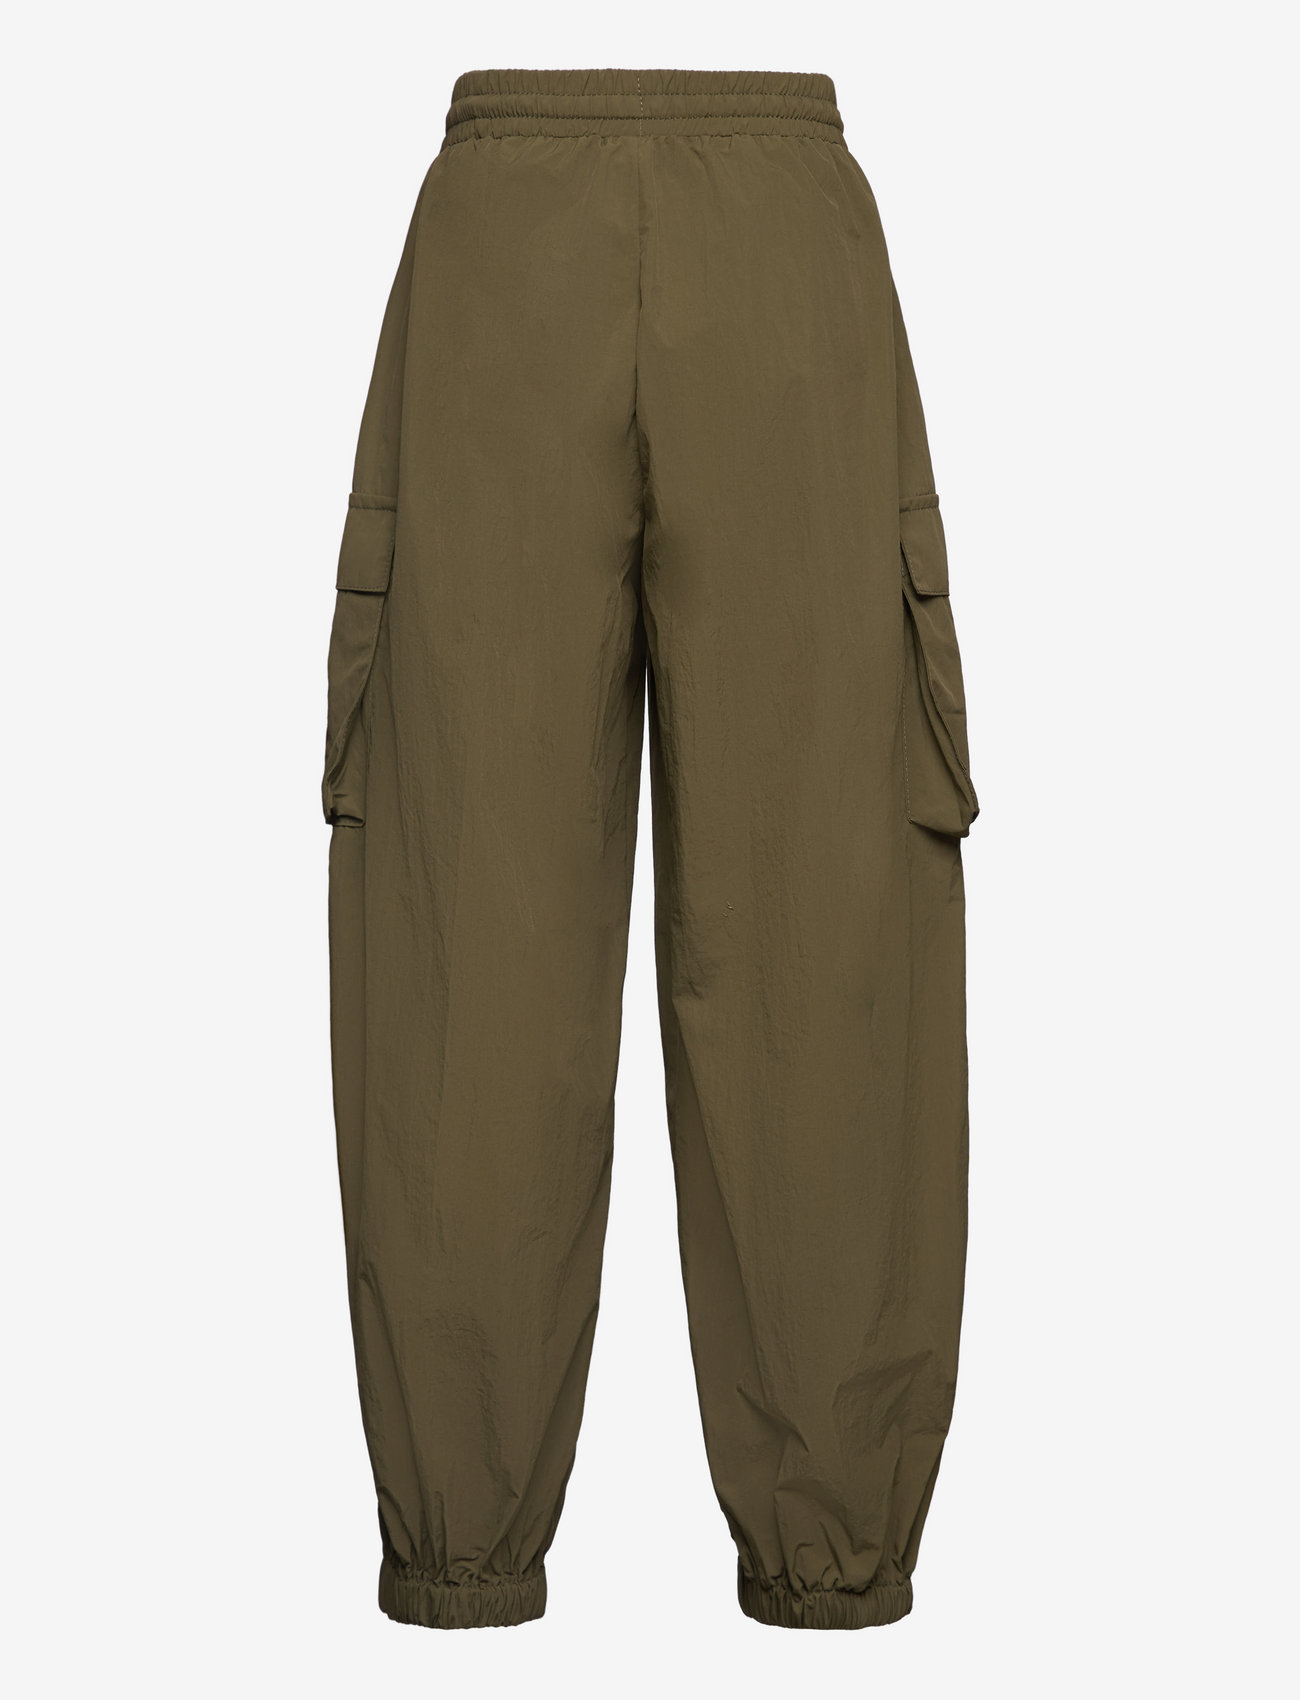 Sofie Schnoor Young - Trousers - bukser - army green - 1